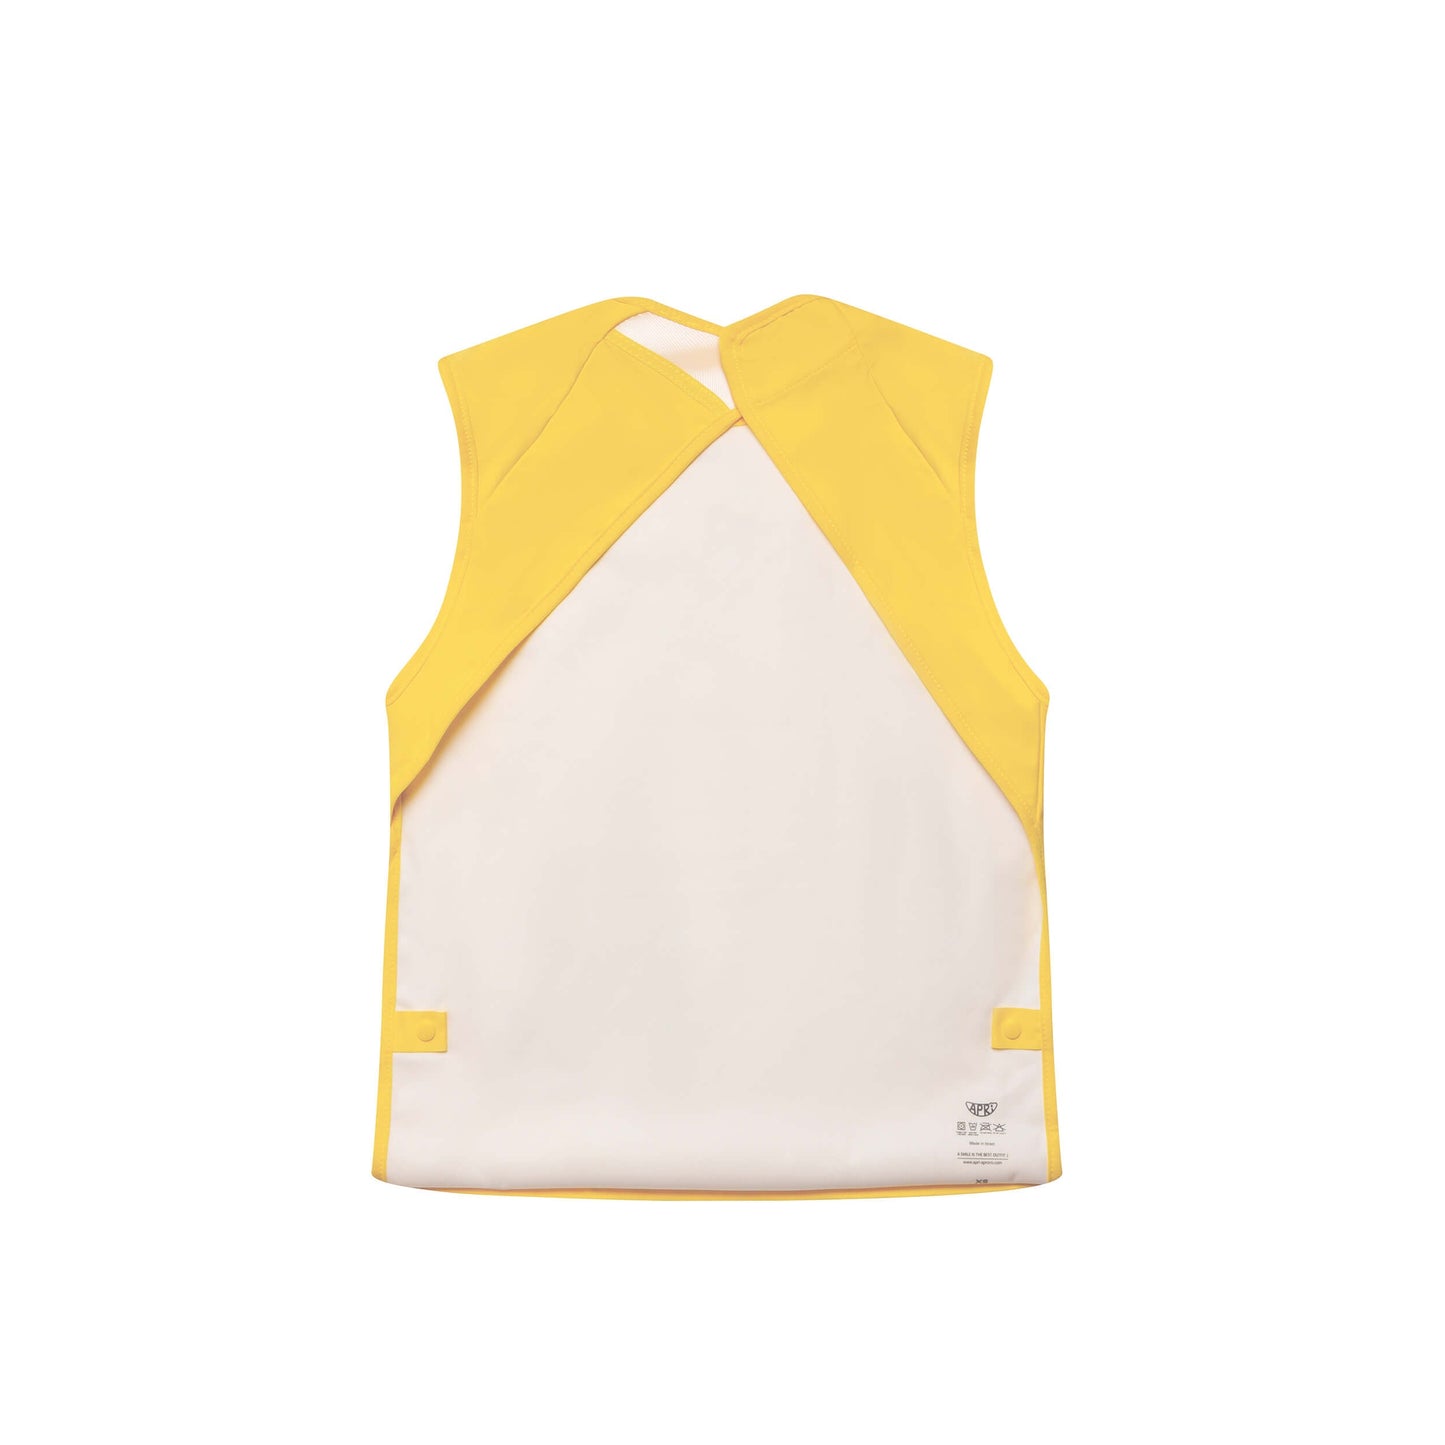 Special needs washable bib for kids, teens and adults. Cap sleeve in yellow, featuring a secure silicone-injected by Apri bibs